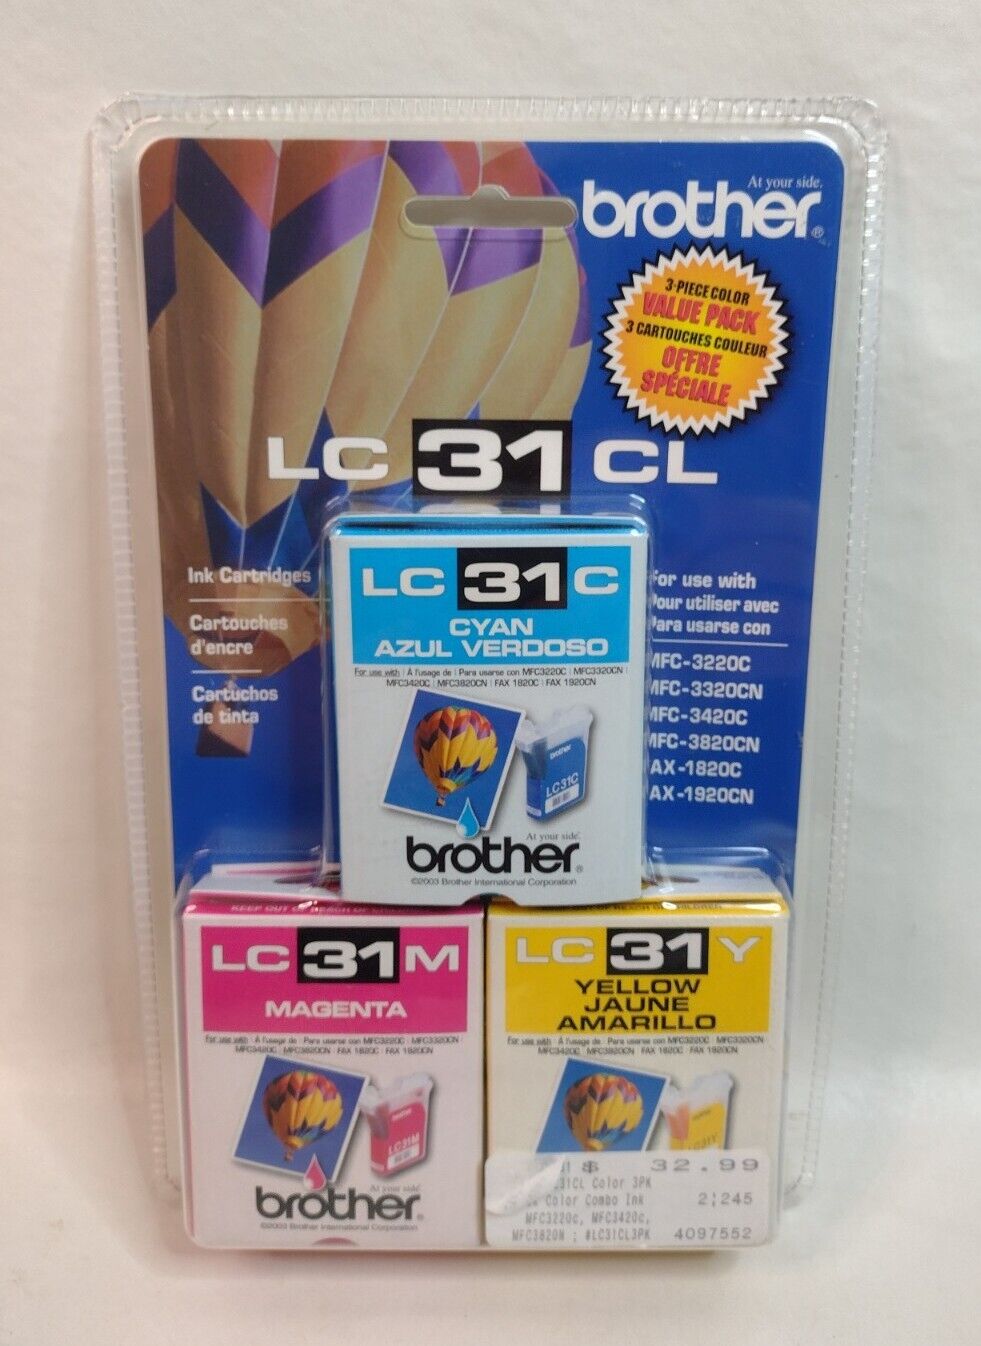 Brother LC 31 CL Ink Cartridges  Cyan, Magenta and Yellow Value Pack Of Three